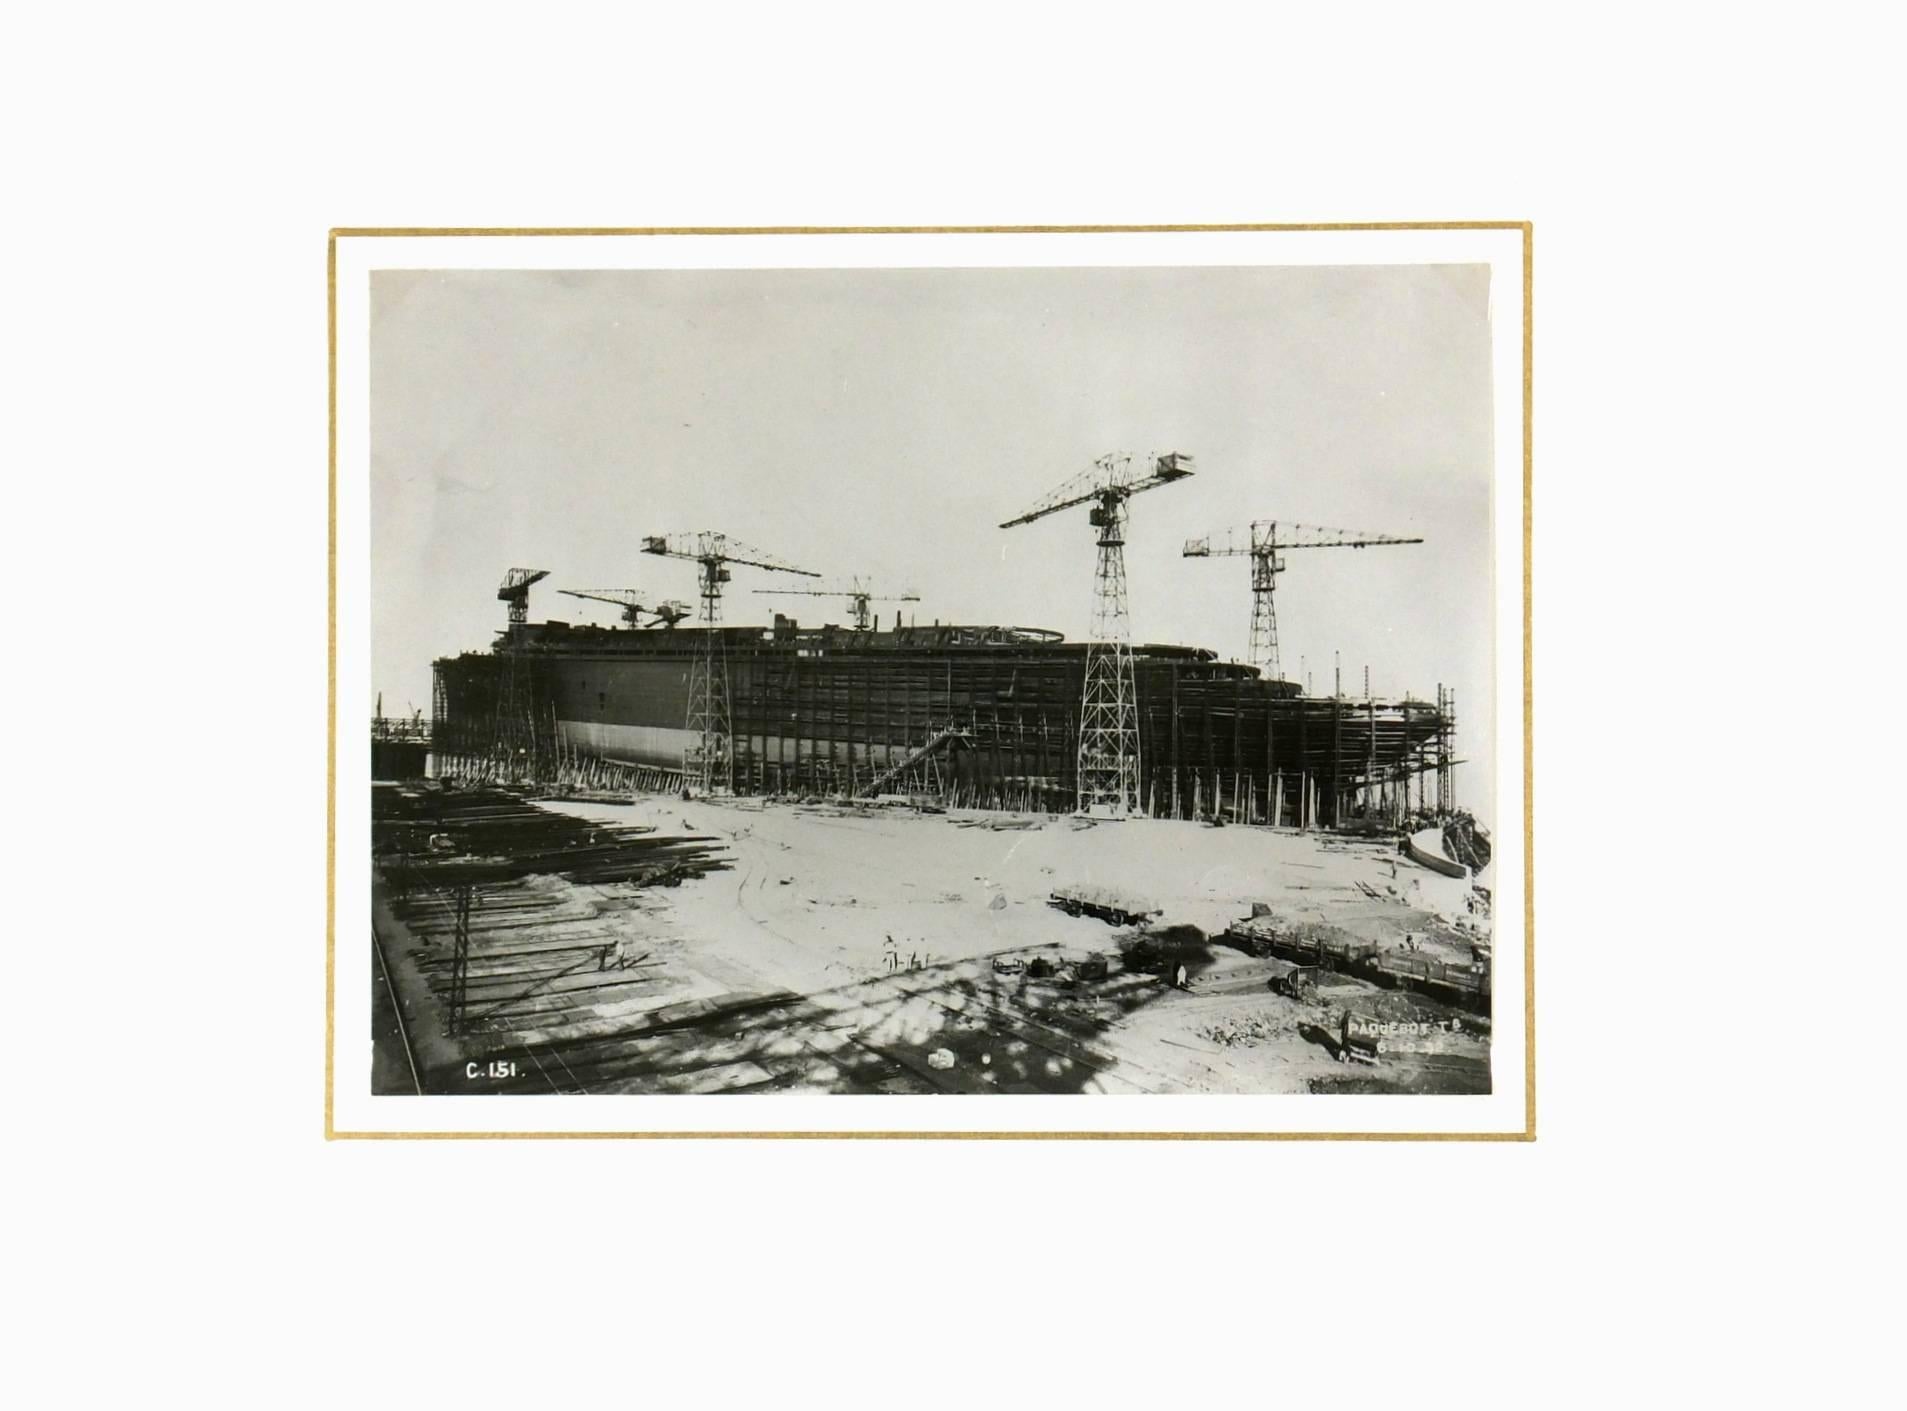 A French press release photograph of the construction of the famous luxury steamer 